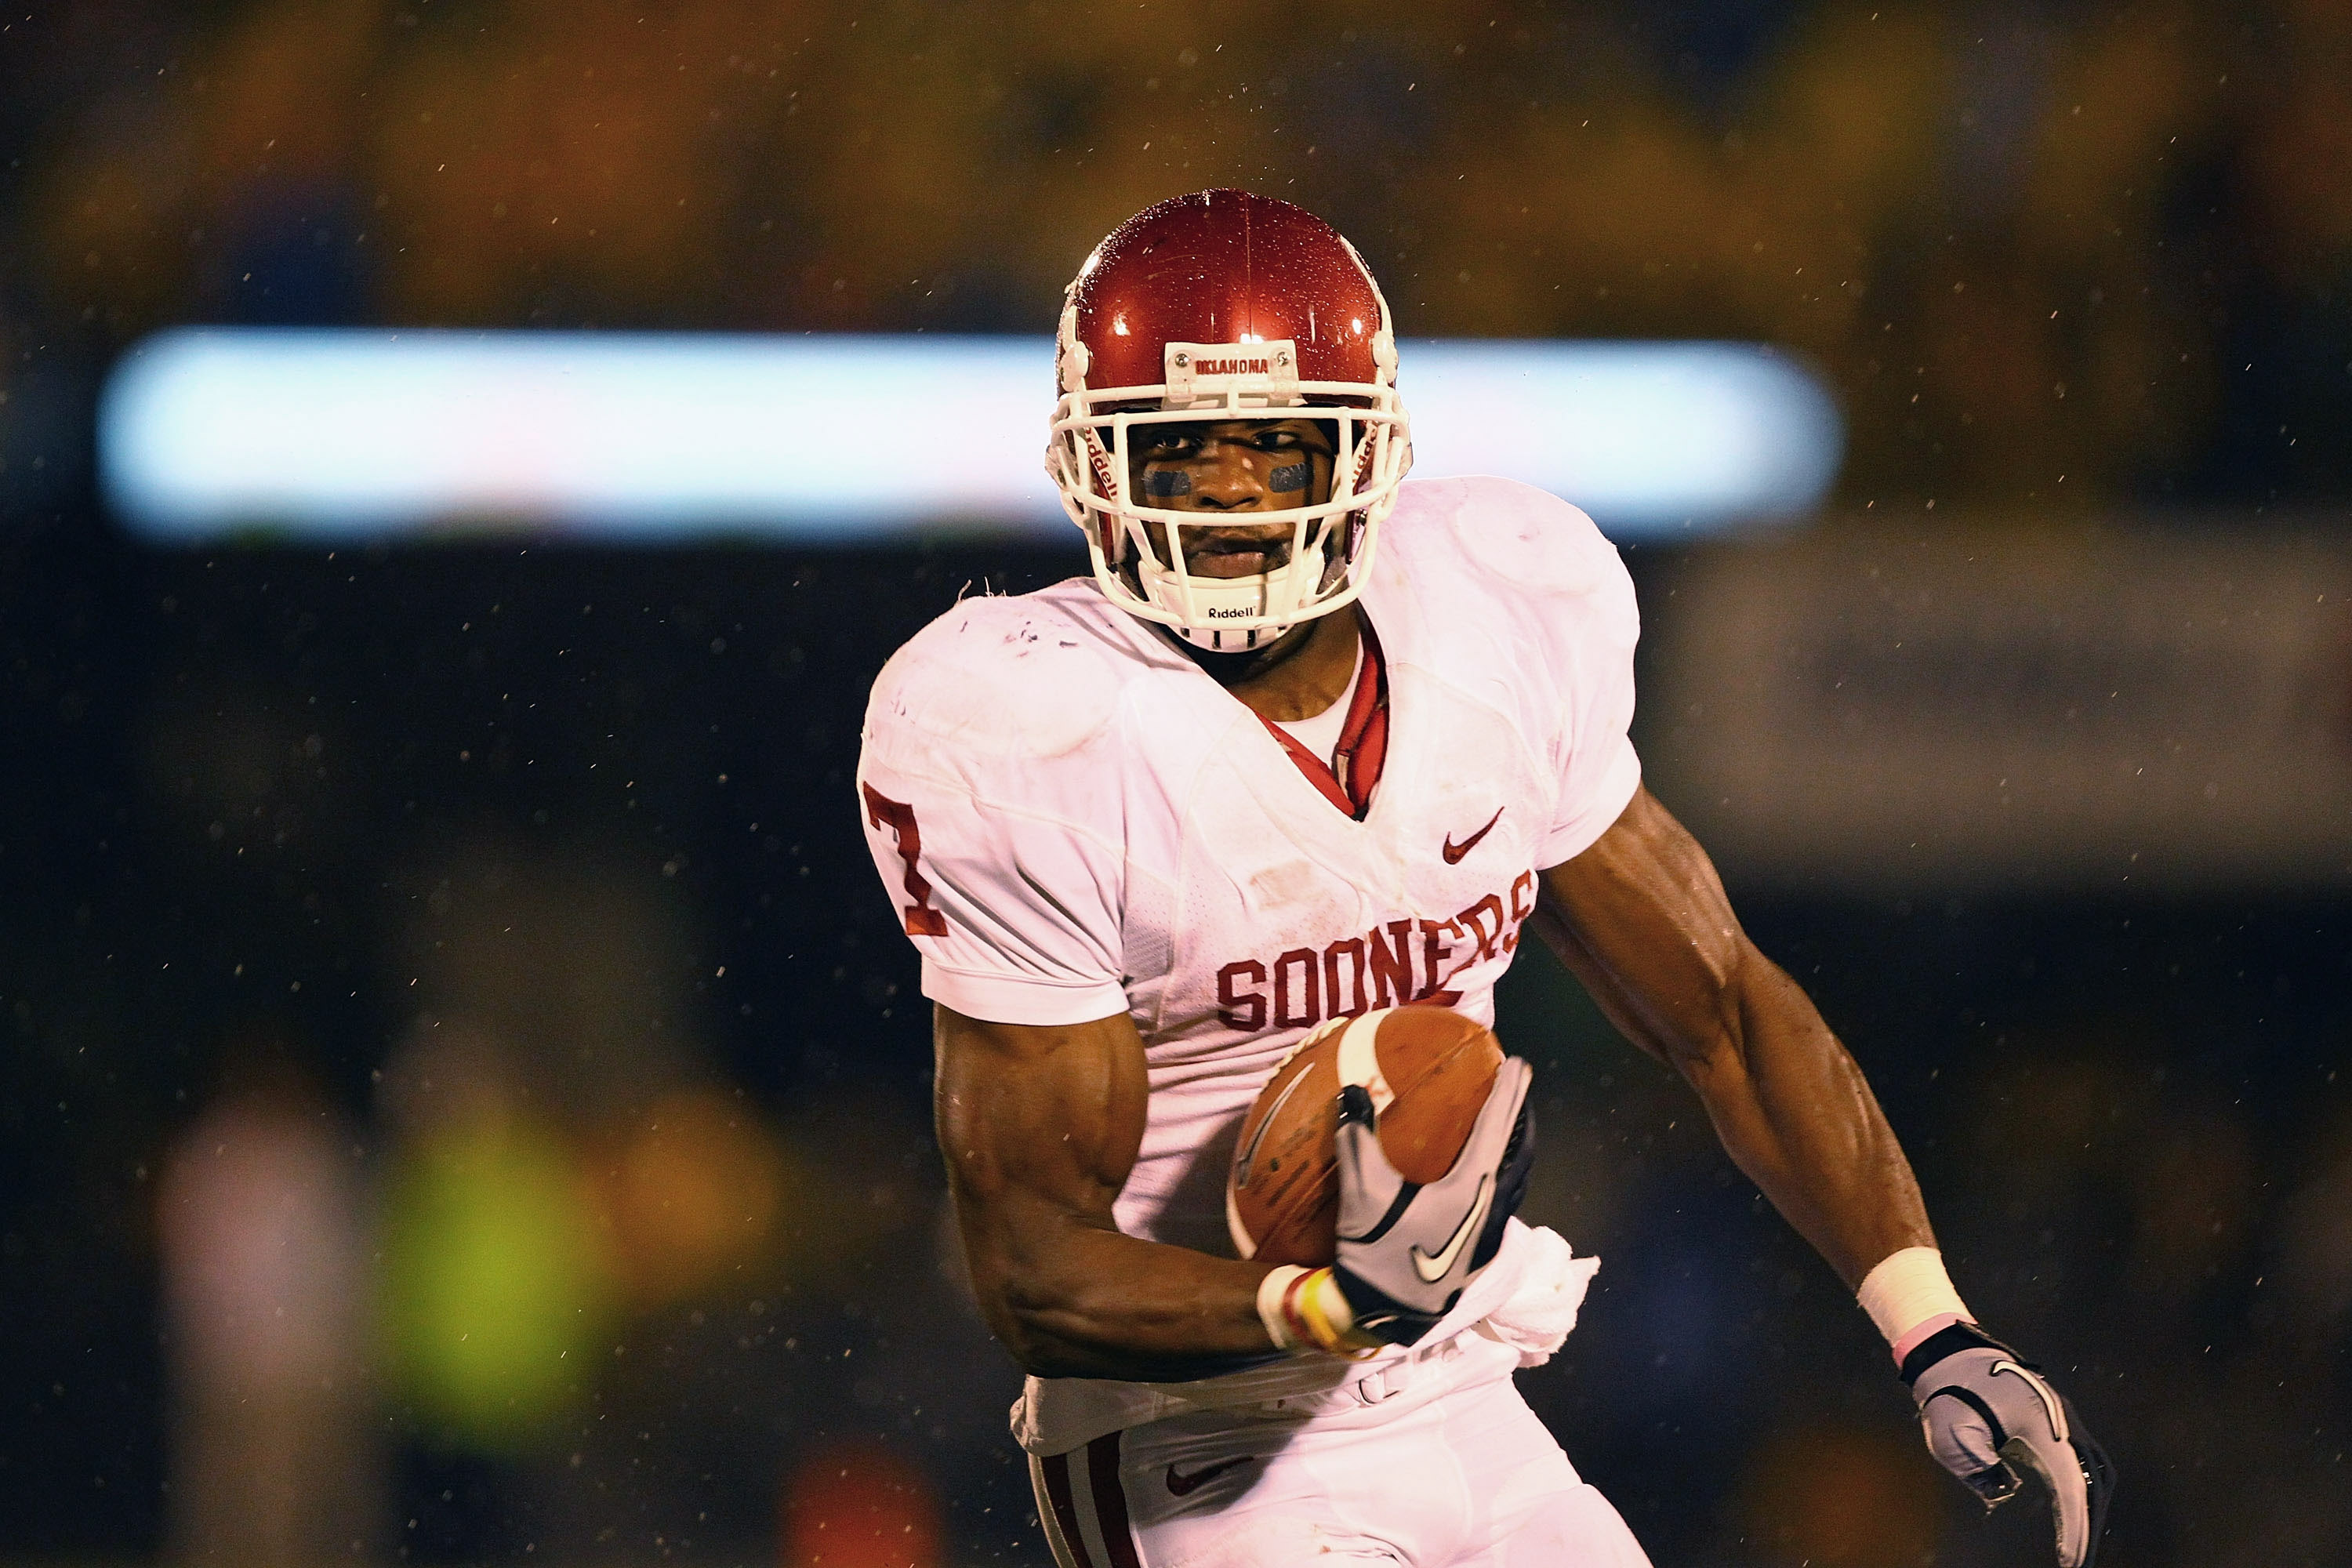 Oklahoma football: Five reasons the Sooners will win and cover at